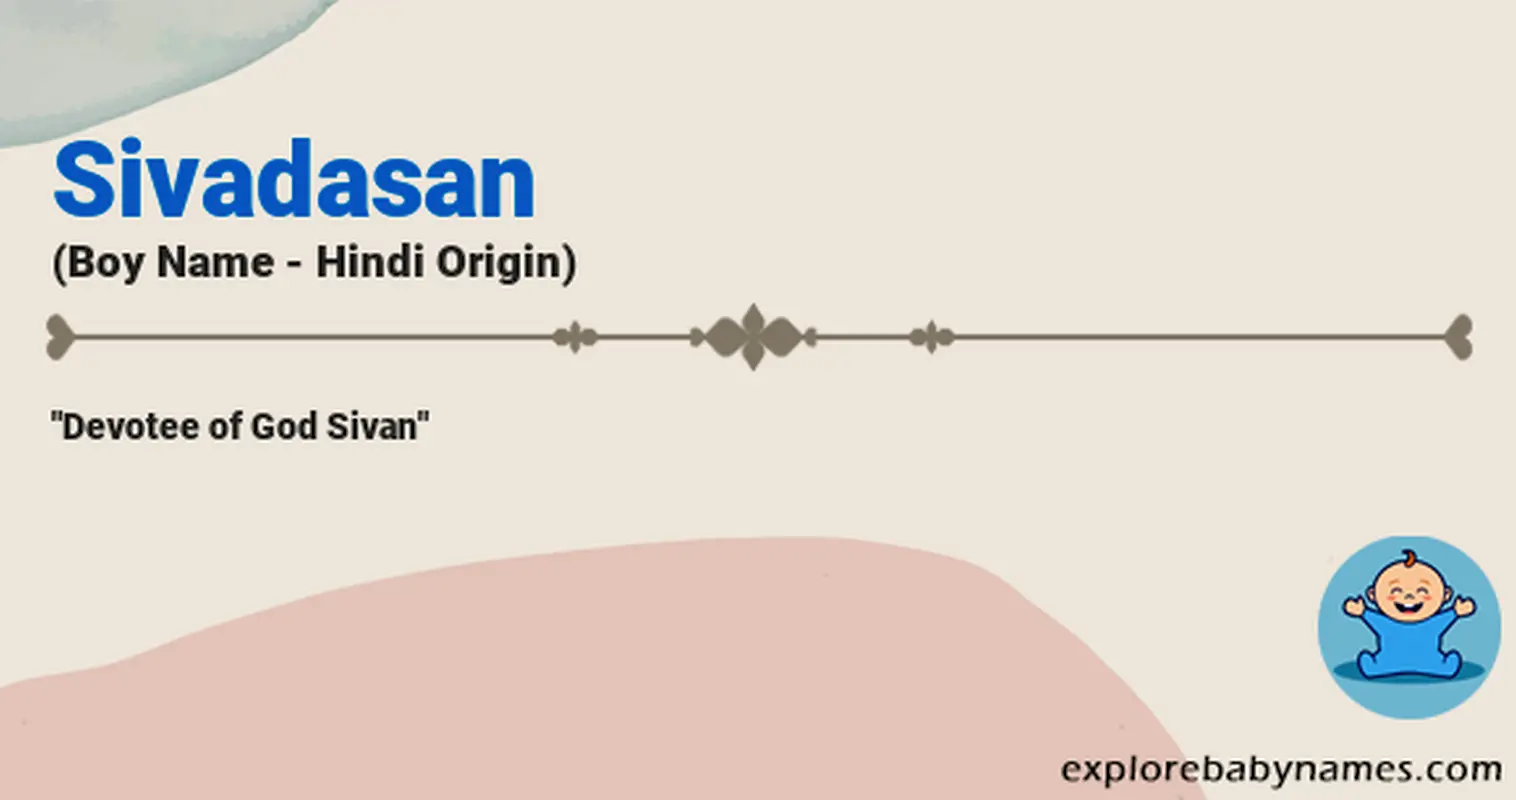 Meaning of Sivadasan